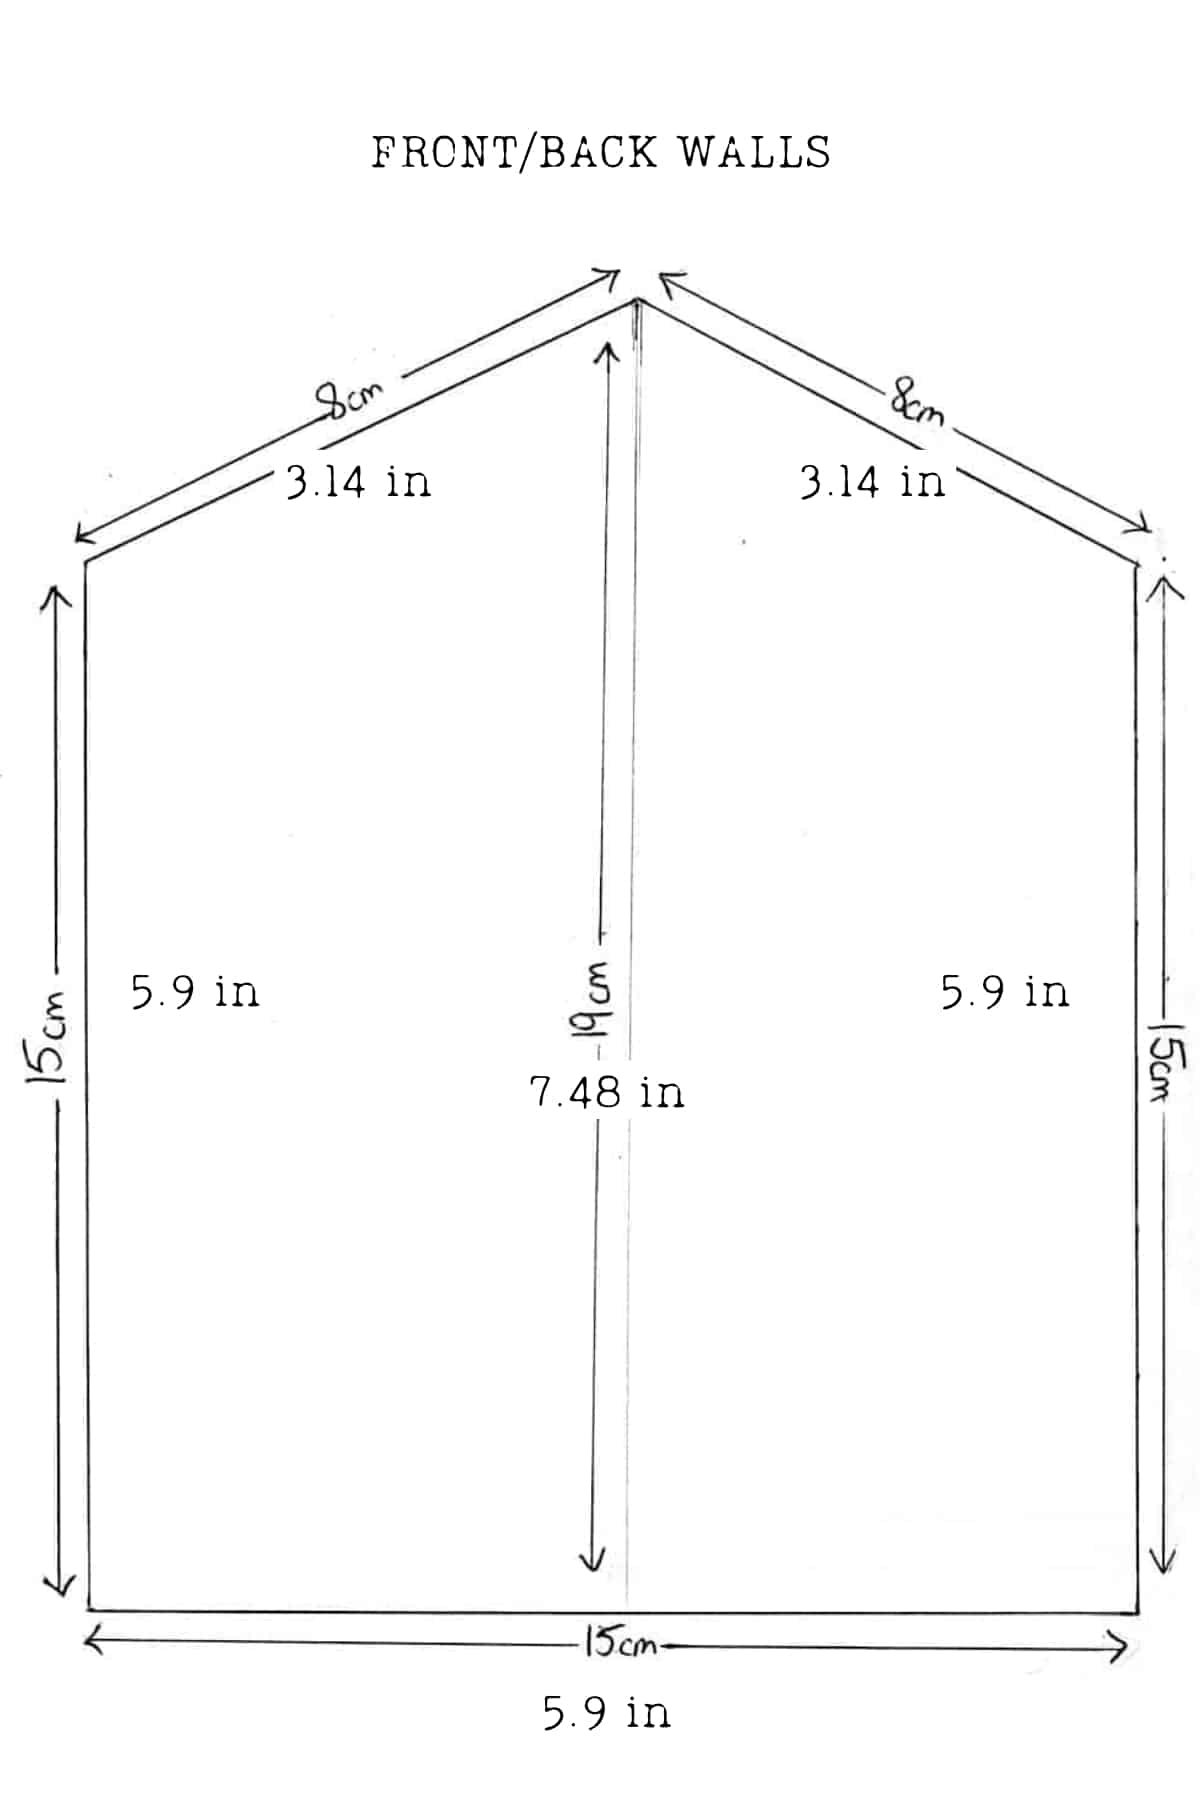 Template for Gingerbread House Front and Back Walls